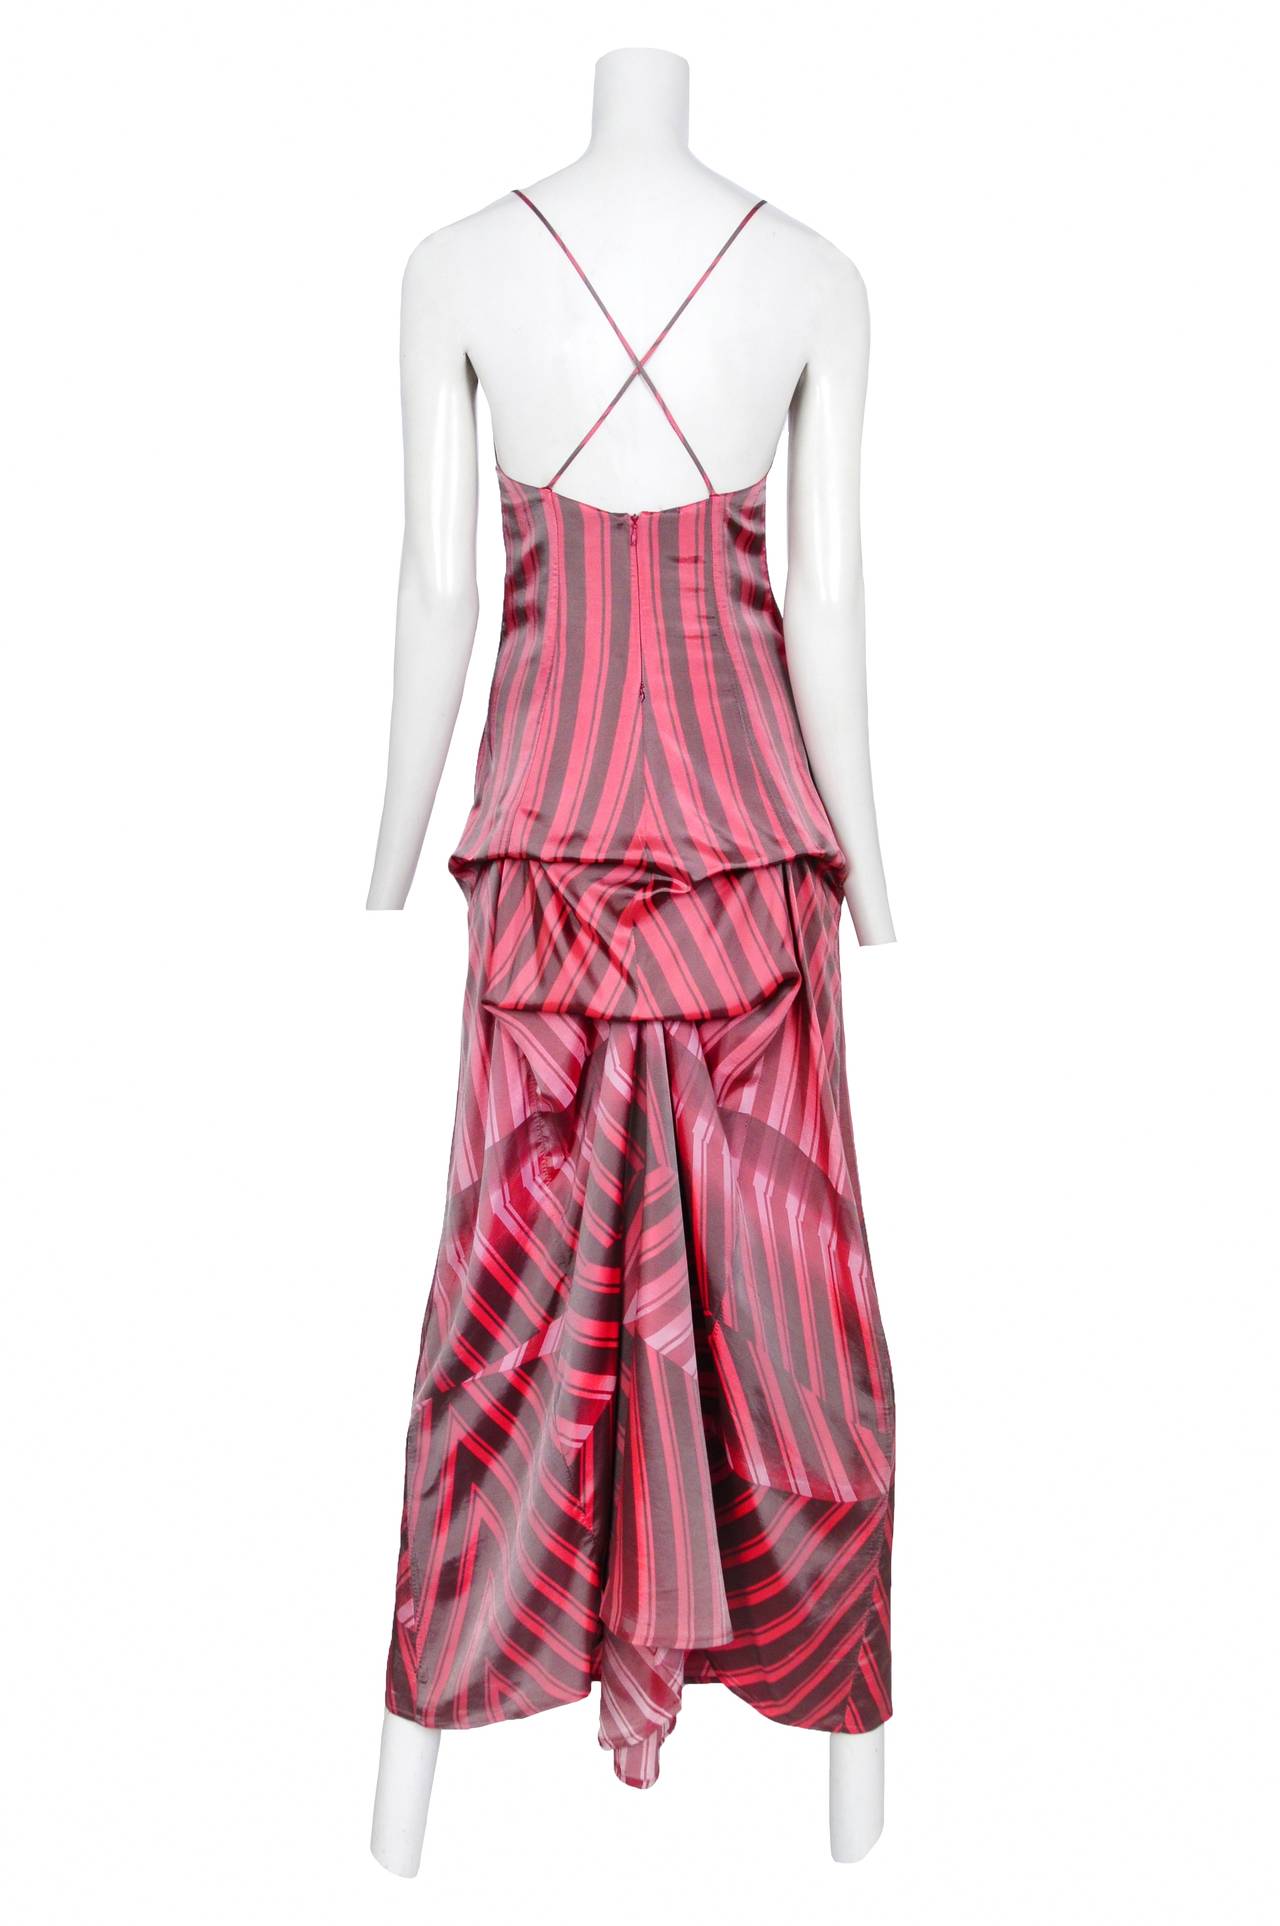 Vintage Dries Van Noten pink and grey tone stripe slip maxi dress with spaghetti straps and gathering at the back in an abstract bustle style.